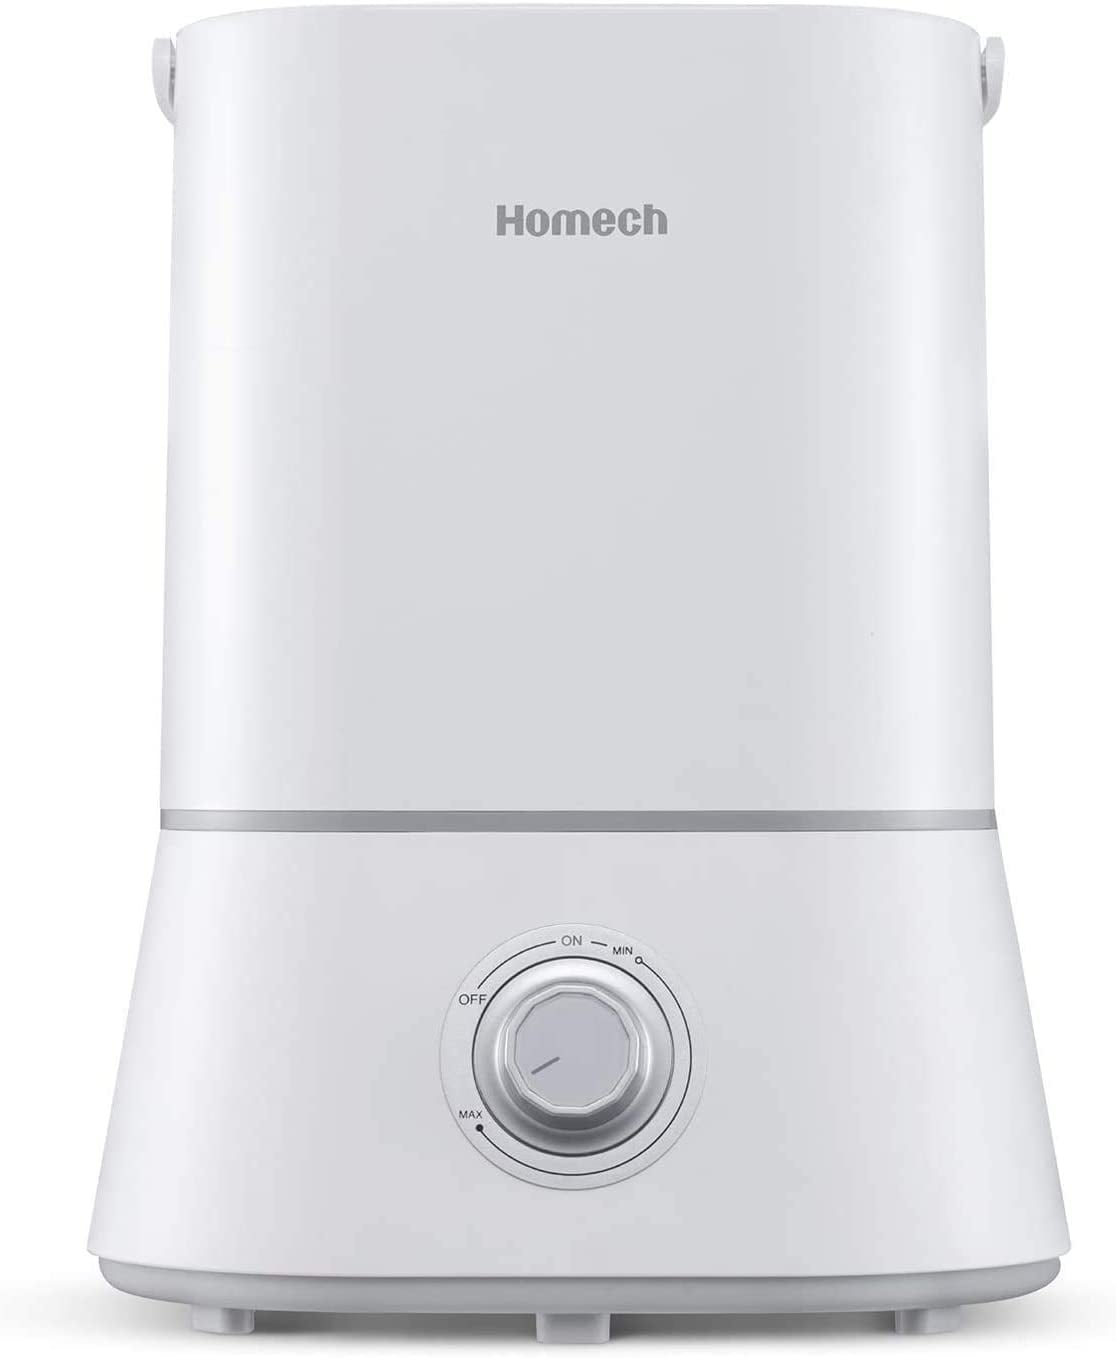 Homech Quiet Ultrasonic Humidifier,Cool Mist Humidifiers for Bedroom Home  Baby (23L/23.23 Gallon) 232-23 Hours,Easy to Clean, 323° Nozzle,Waterless Tank